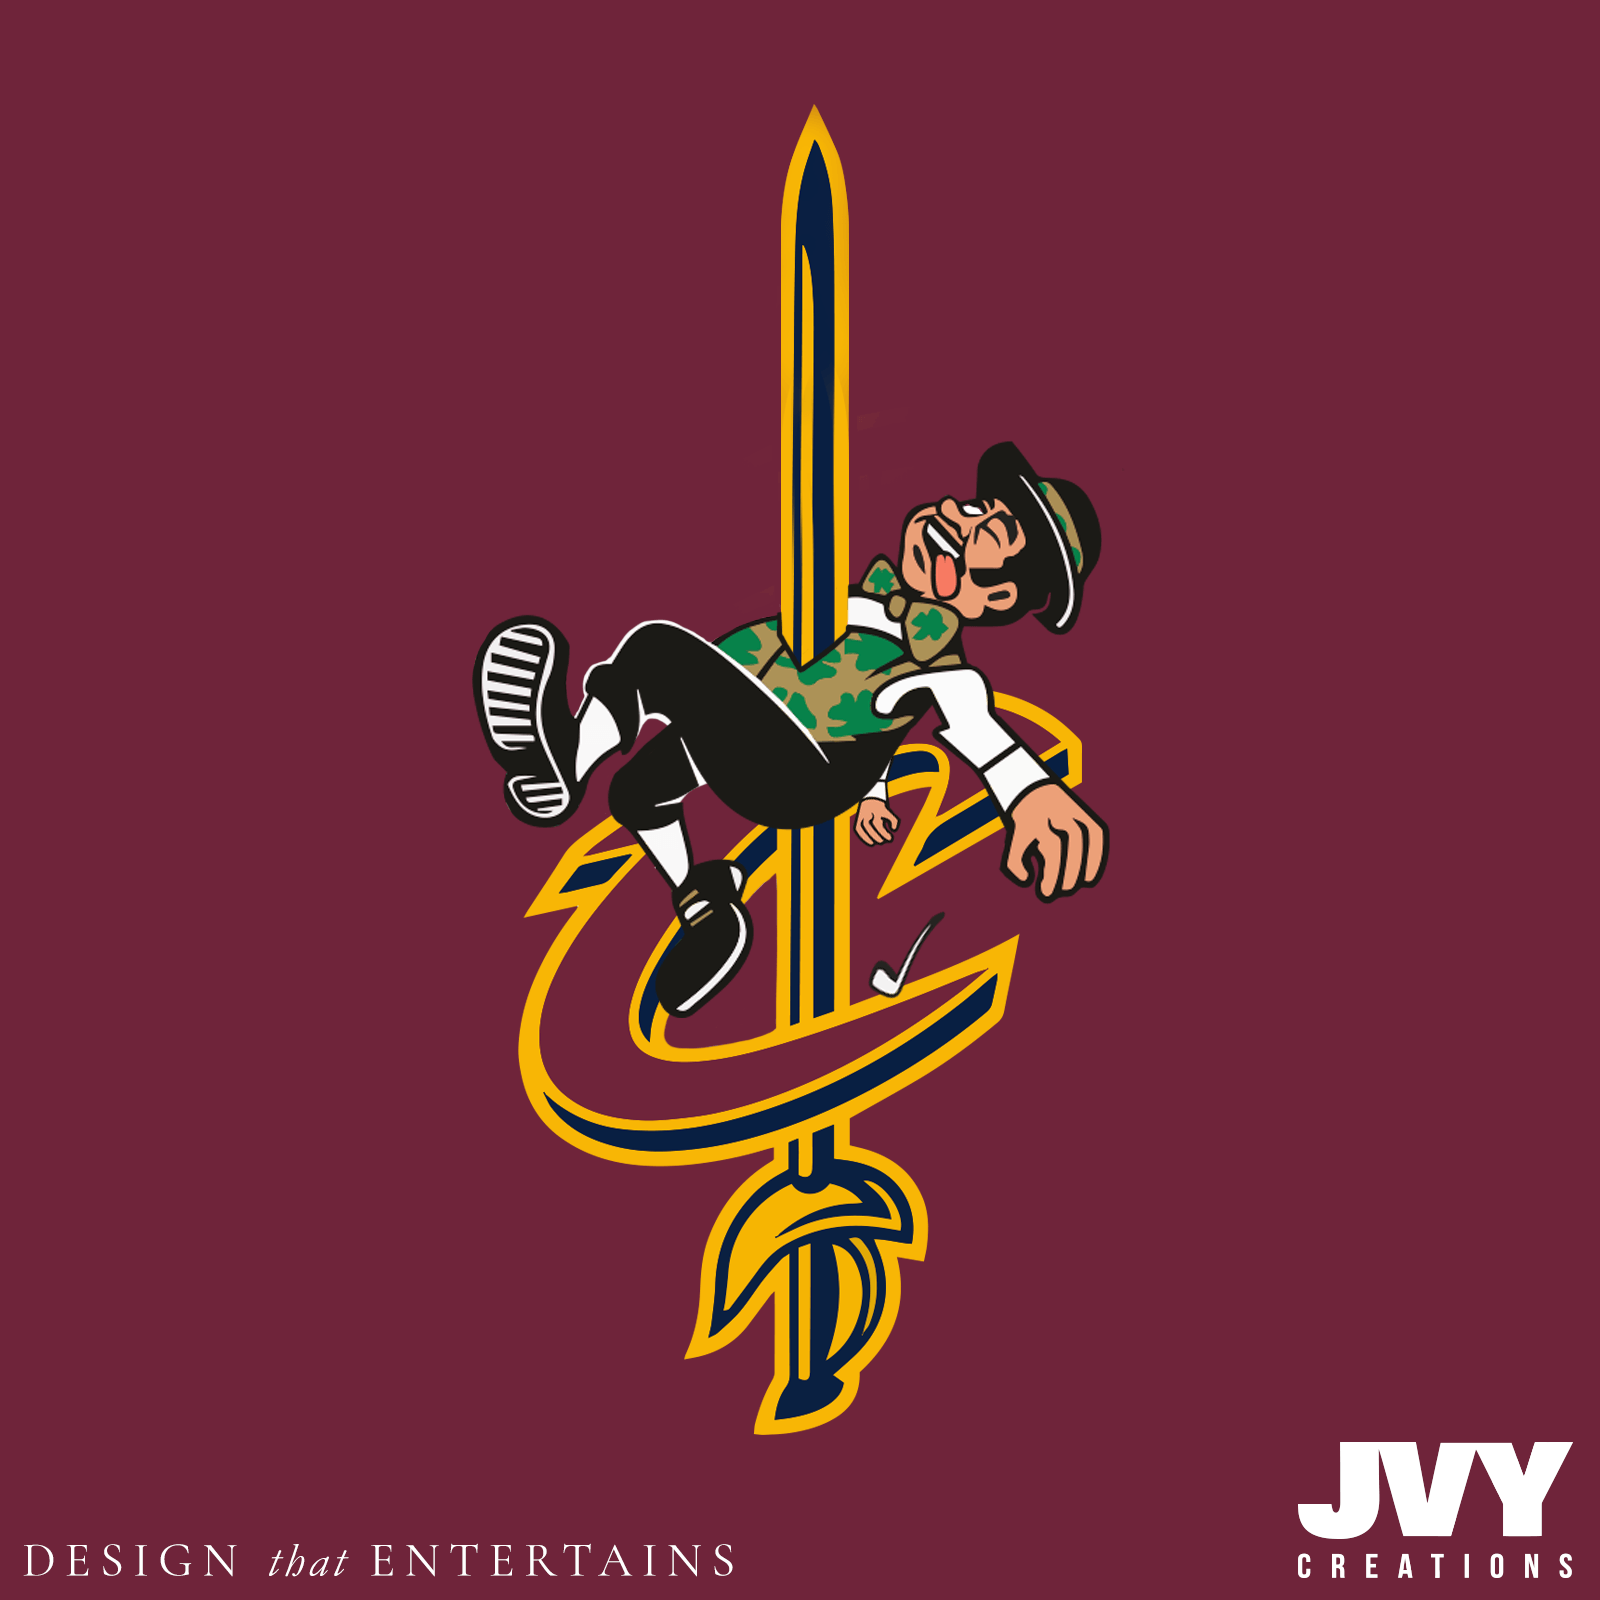 Cavs Logo - New Cavs logo as they beat the Celtics and go to the NBA Finals ...